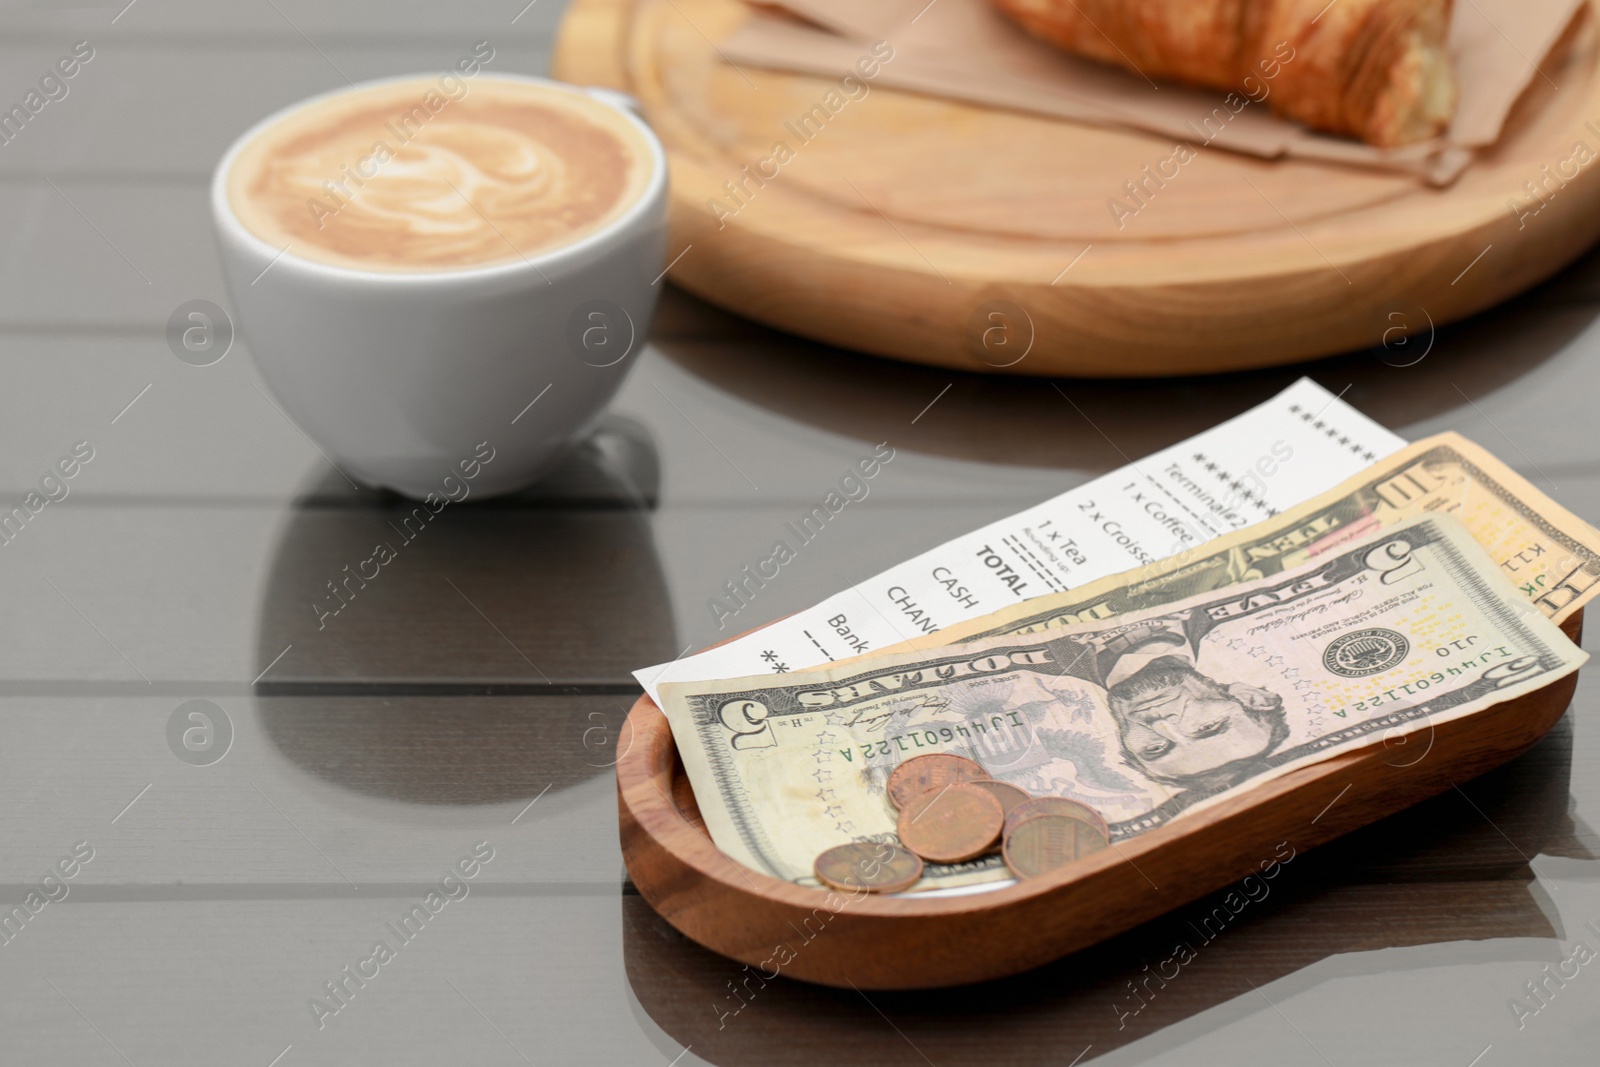 Photo of Tips, receipt and cup with coffee on wooden table